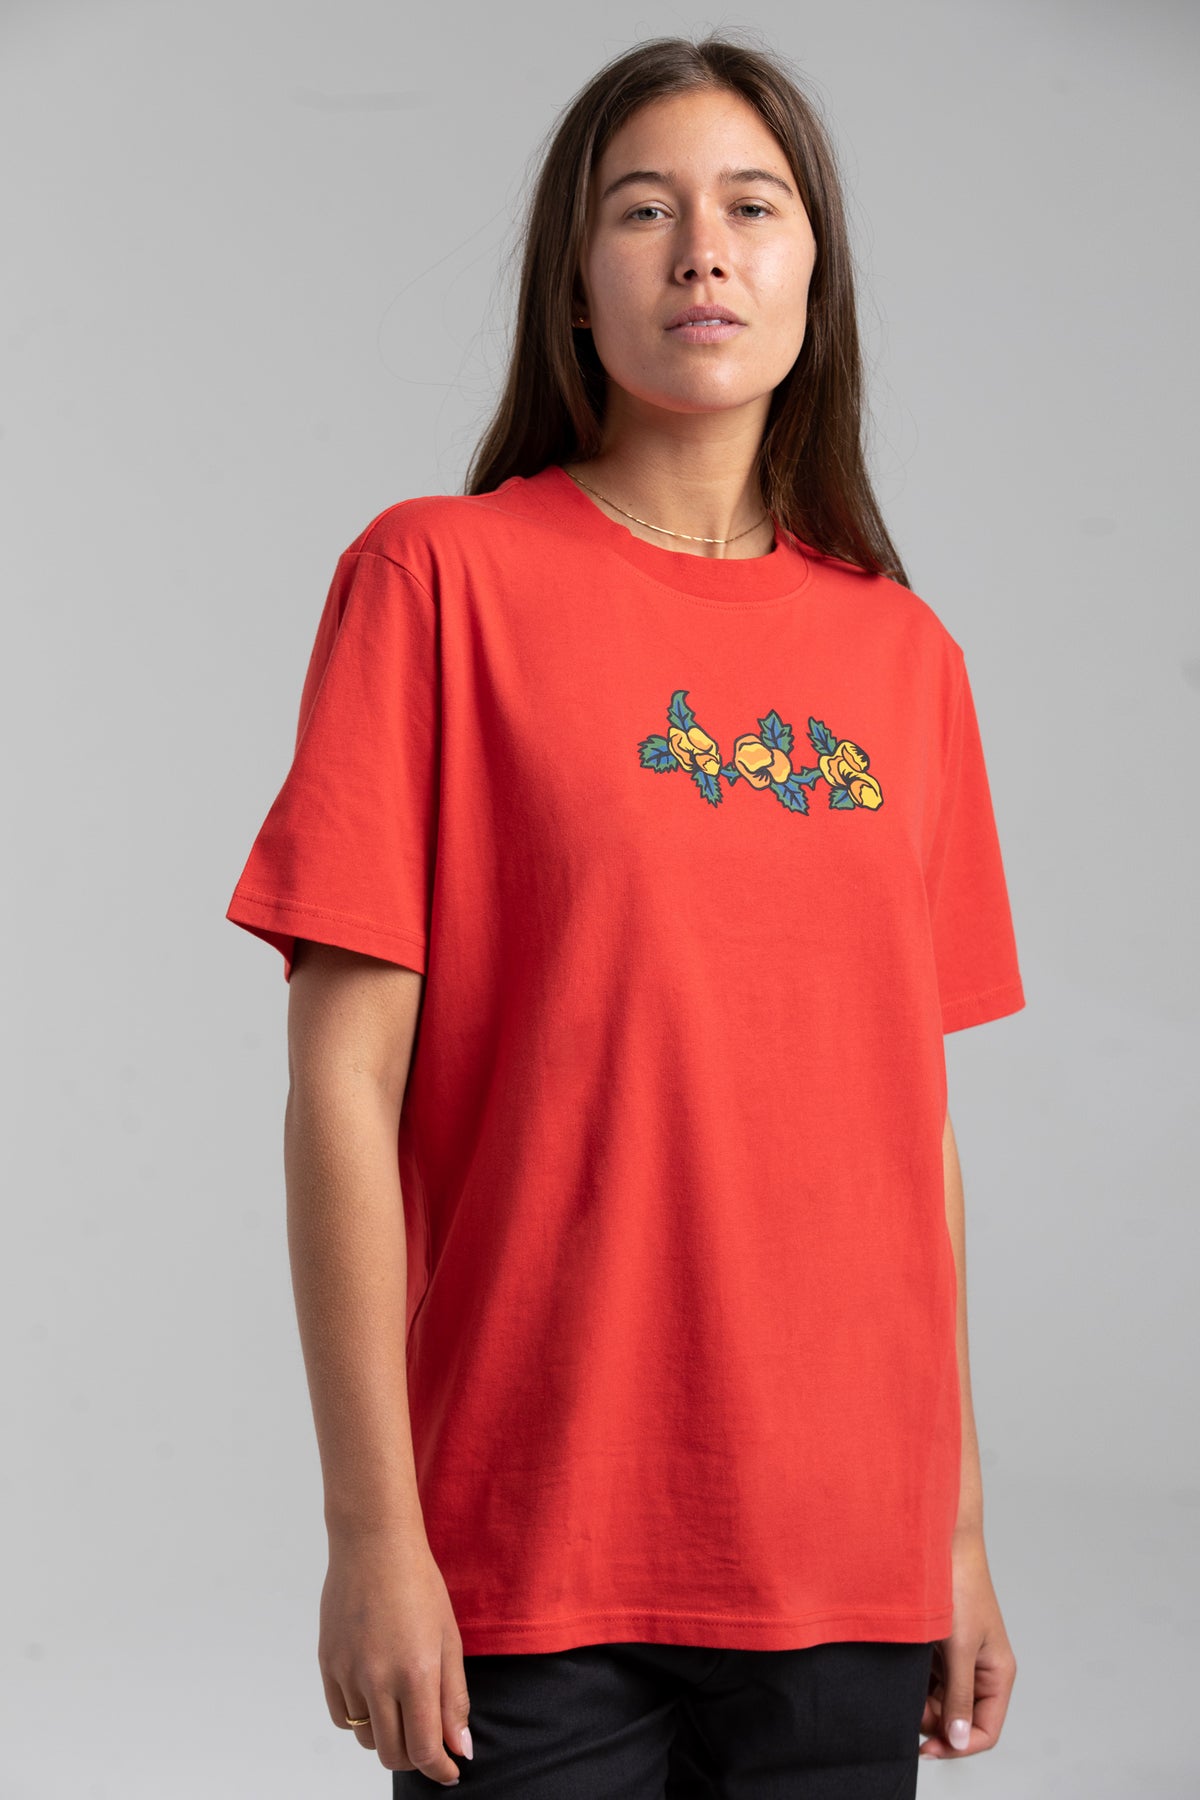 MCKAY T-SHIRT - 1 RED